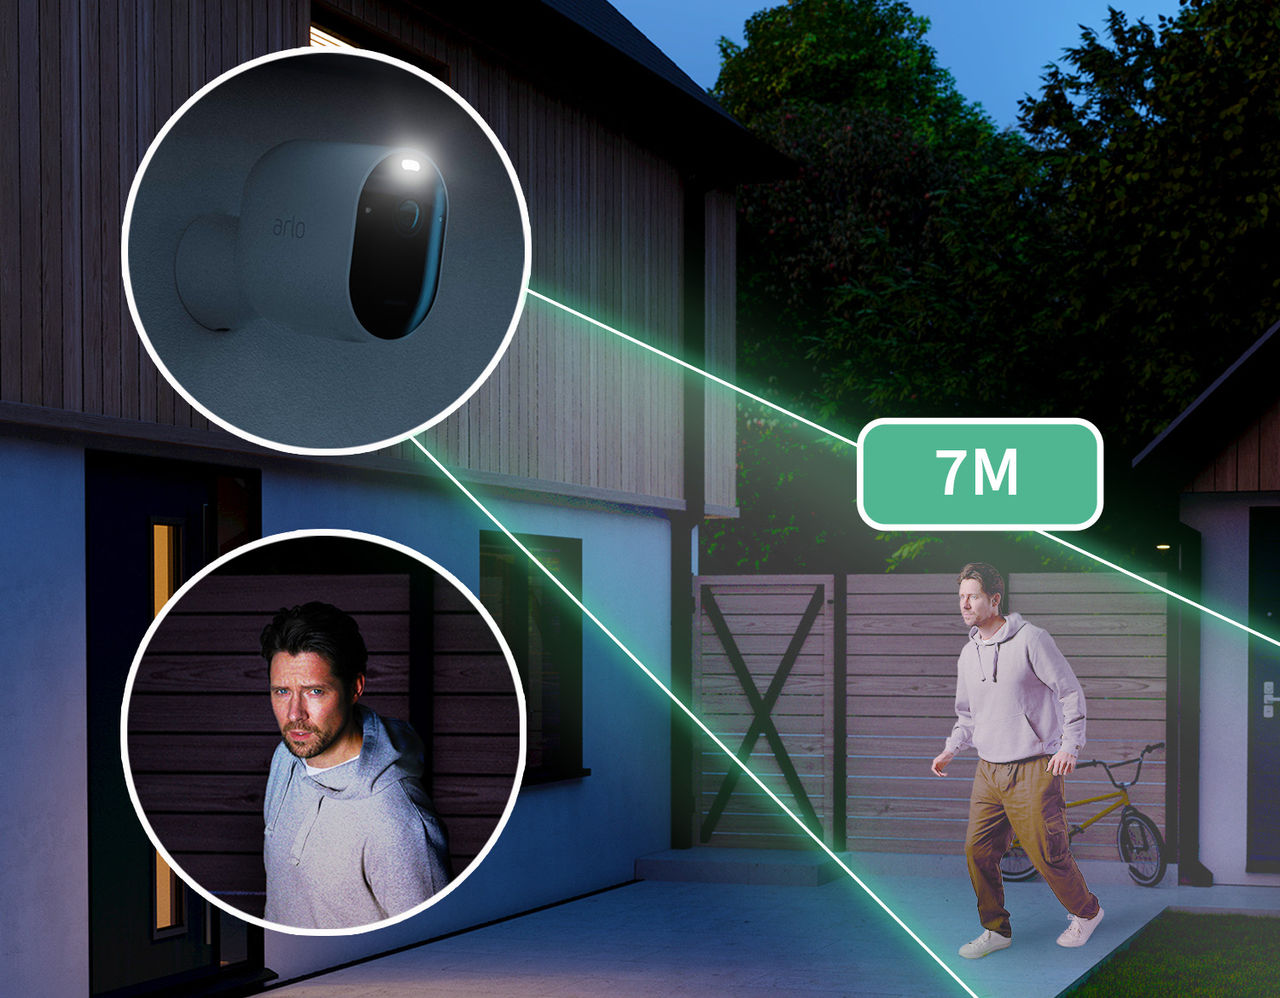   An effect showing the great range of the projector of the Arlo Pro 5 camera which illuminates up to 7m.